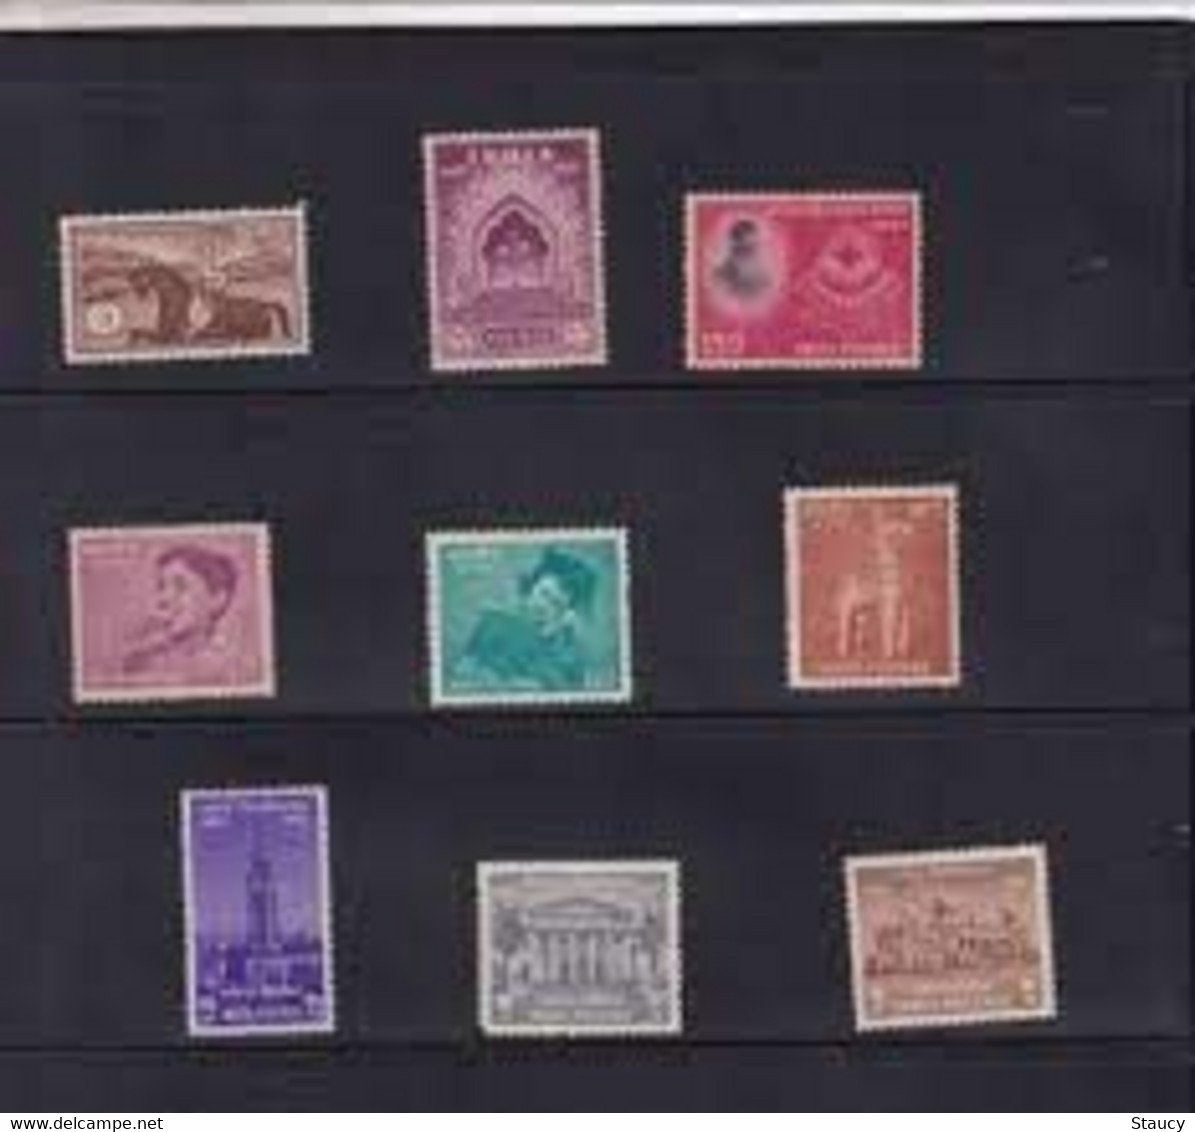 India 1957 Complete Year Pack / Set / Collection Total 9 Stamps (No Missing) MNH As Per Scan - Annate Complete